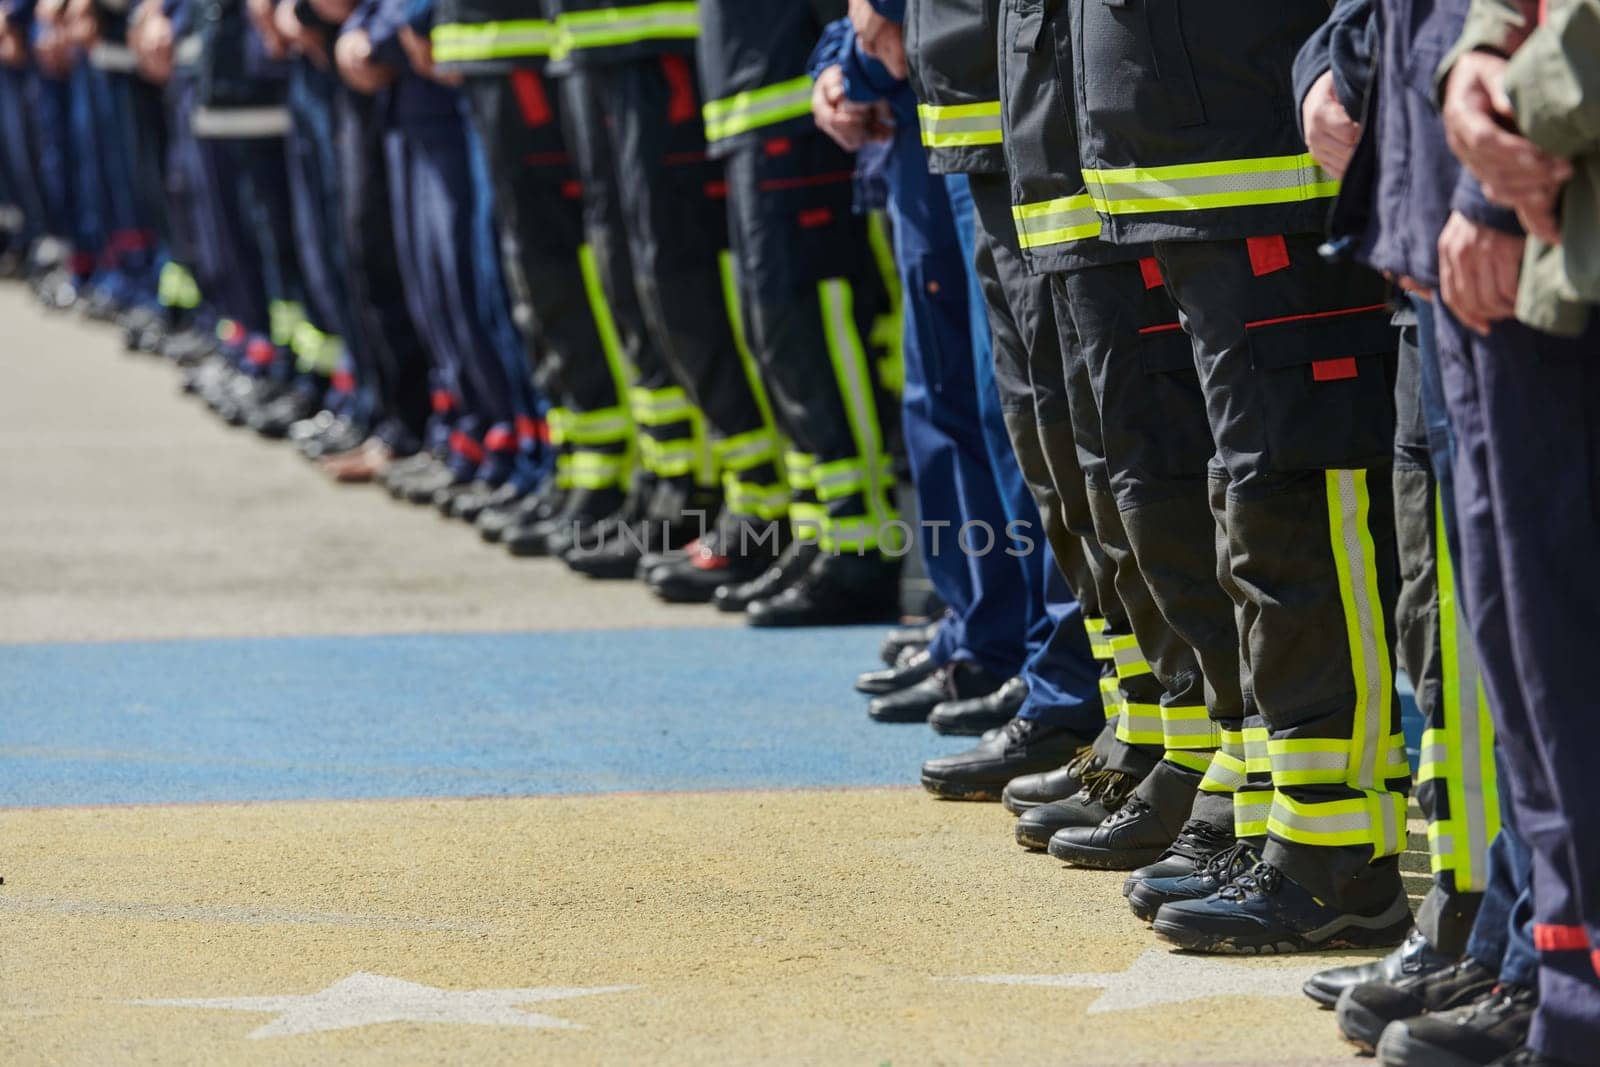 A group of firefighters lined up, saluting the flag, applauding in solidarity, and gearing up for intensive training sessions, showcasing their unwavering commitment to service and teamwork